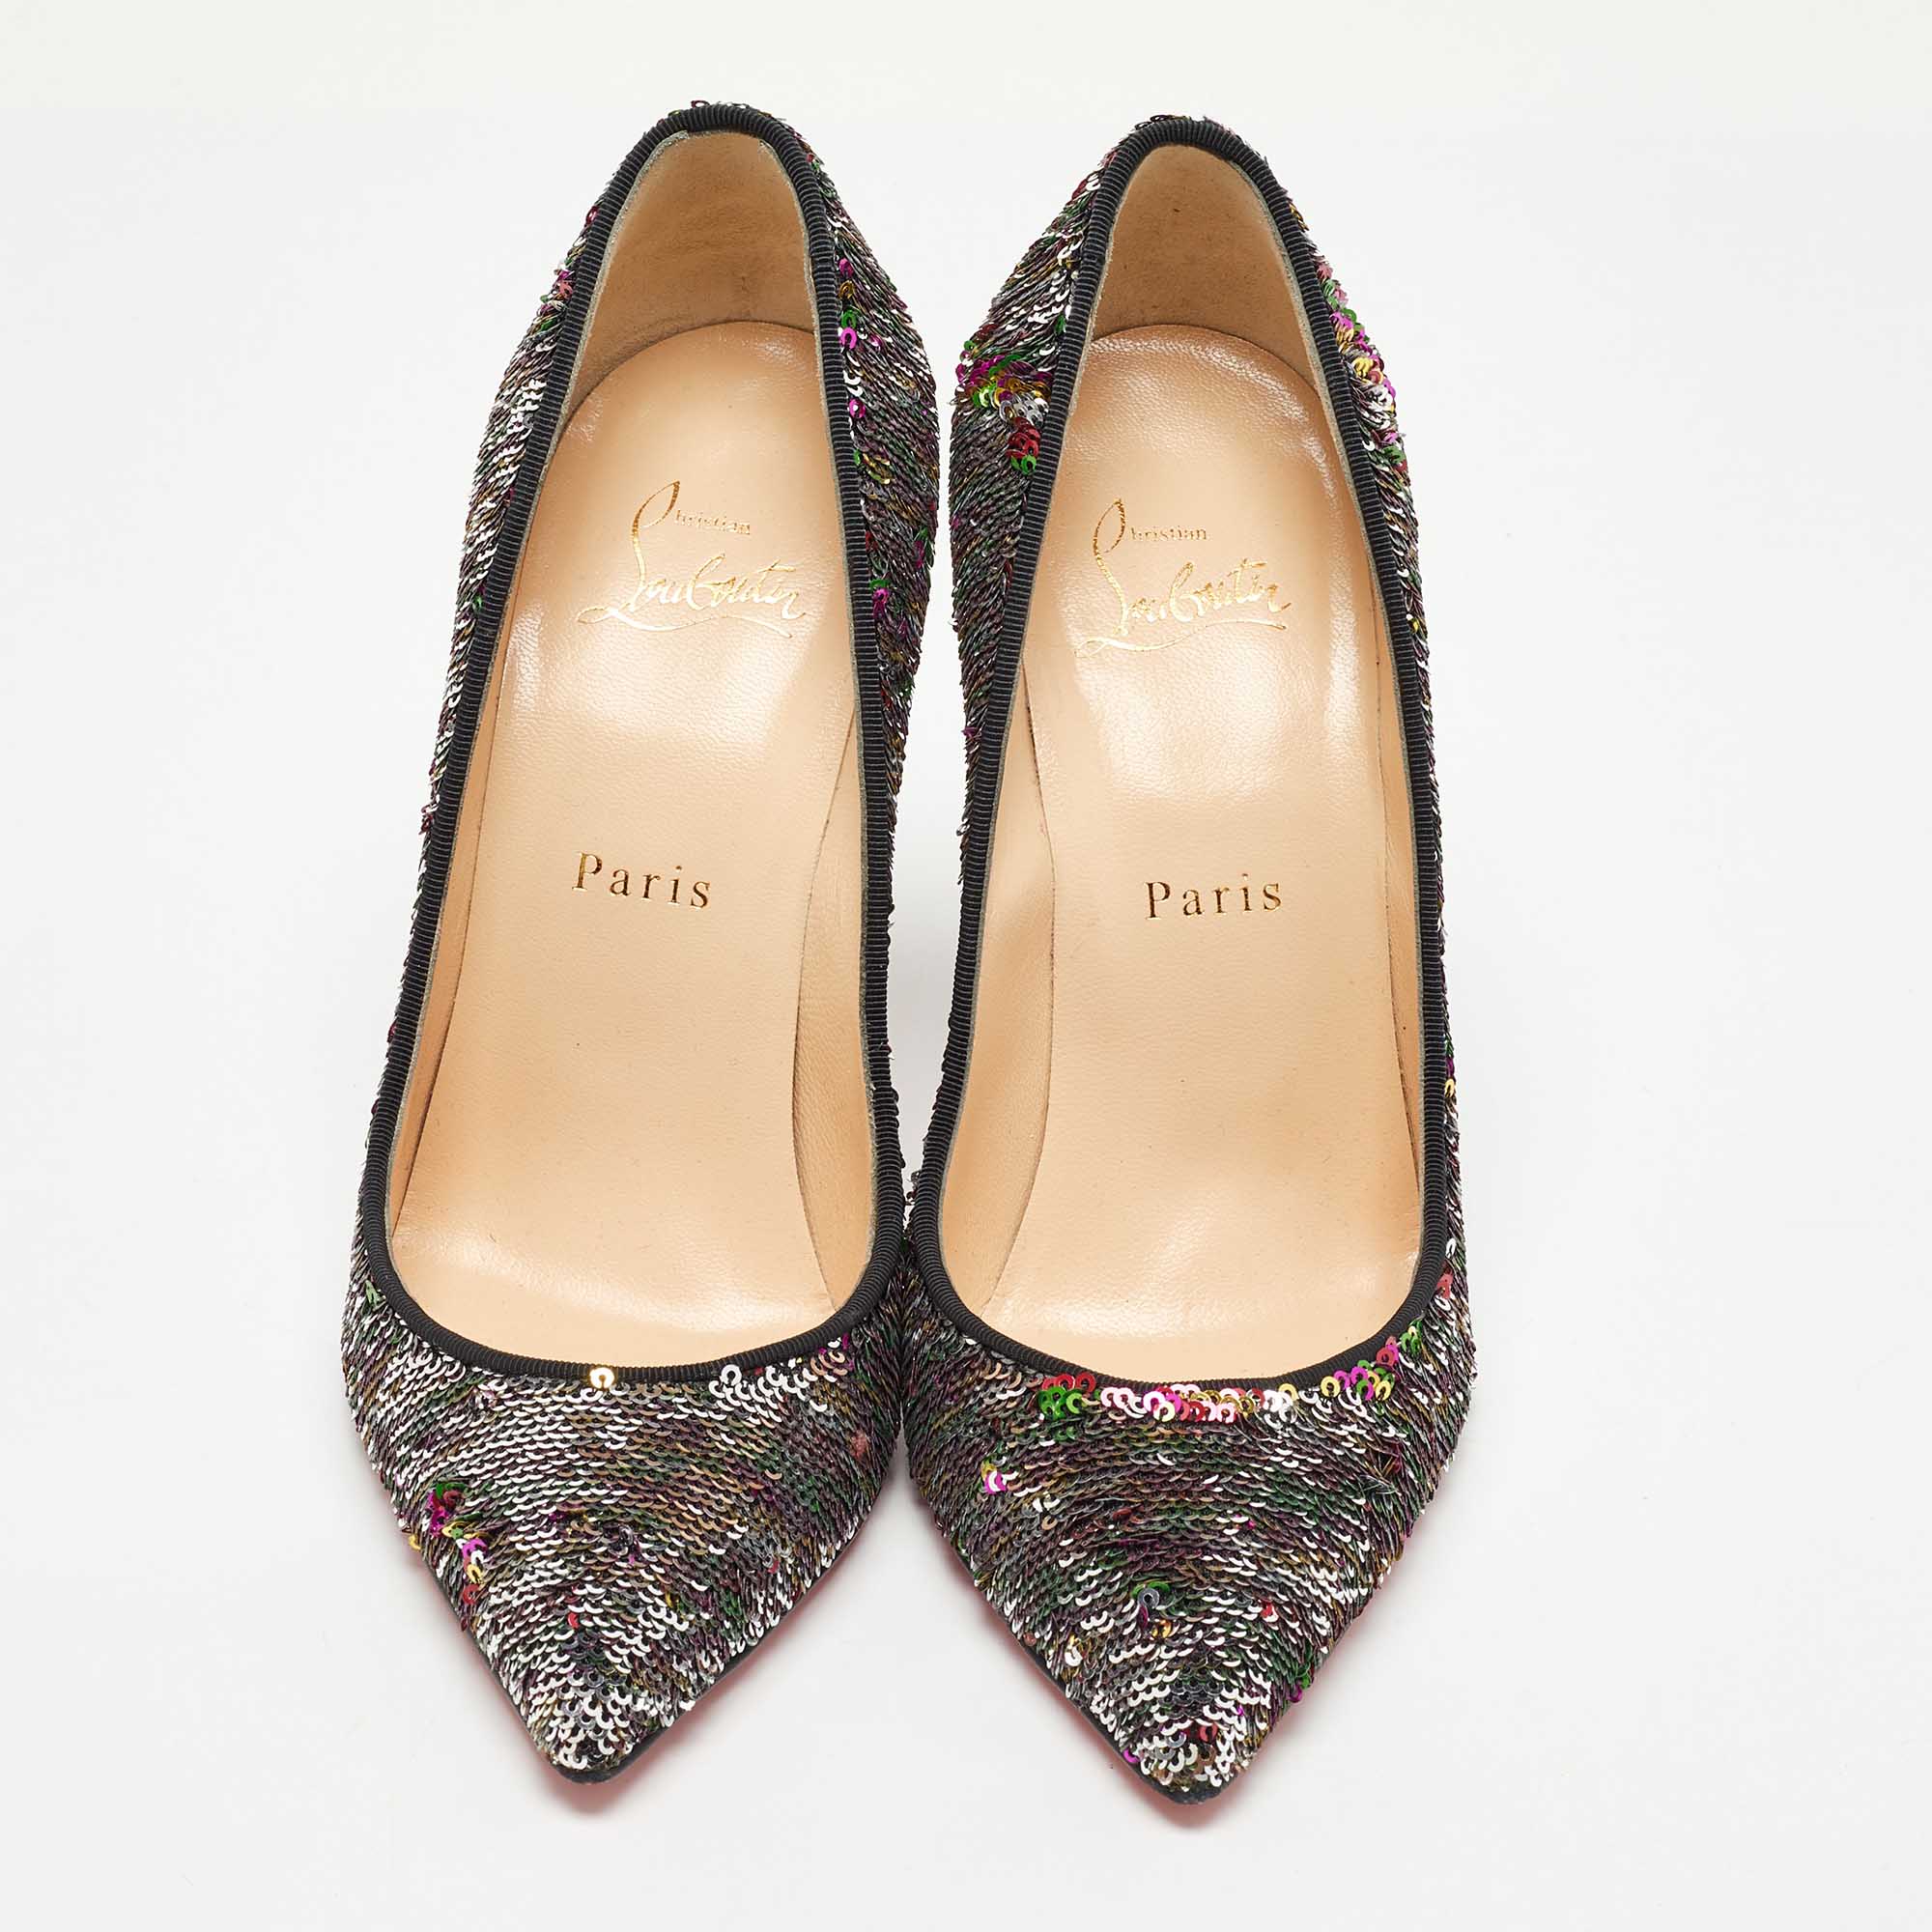 Christian Louboutin Multicolor Sequins Pigalle Follies Pointed Toe Pumps Size 37.5